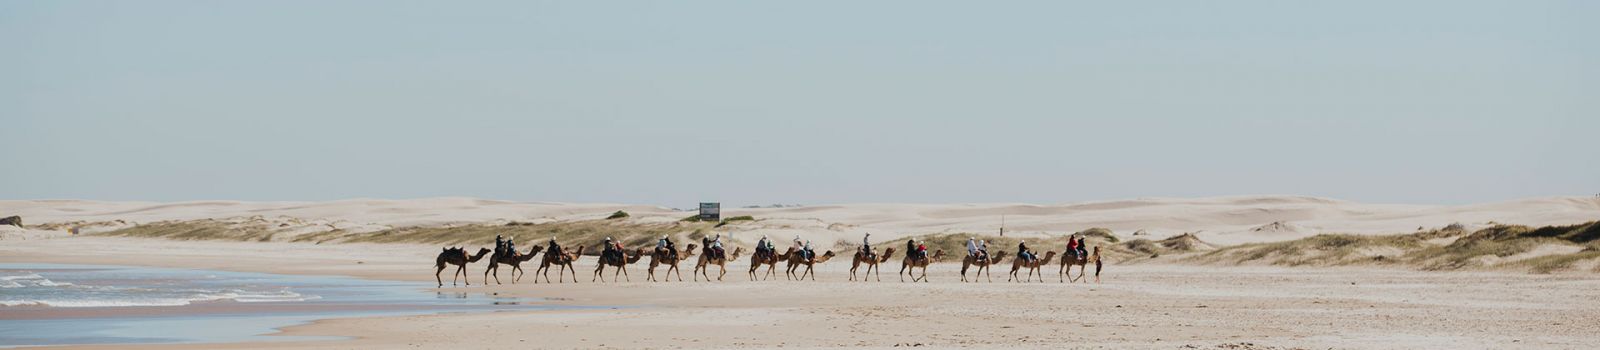 Image of a sand dune with camels walking over it banner image